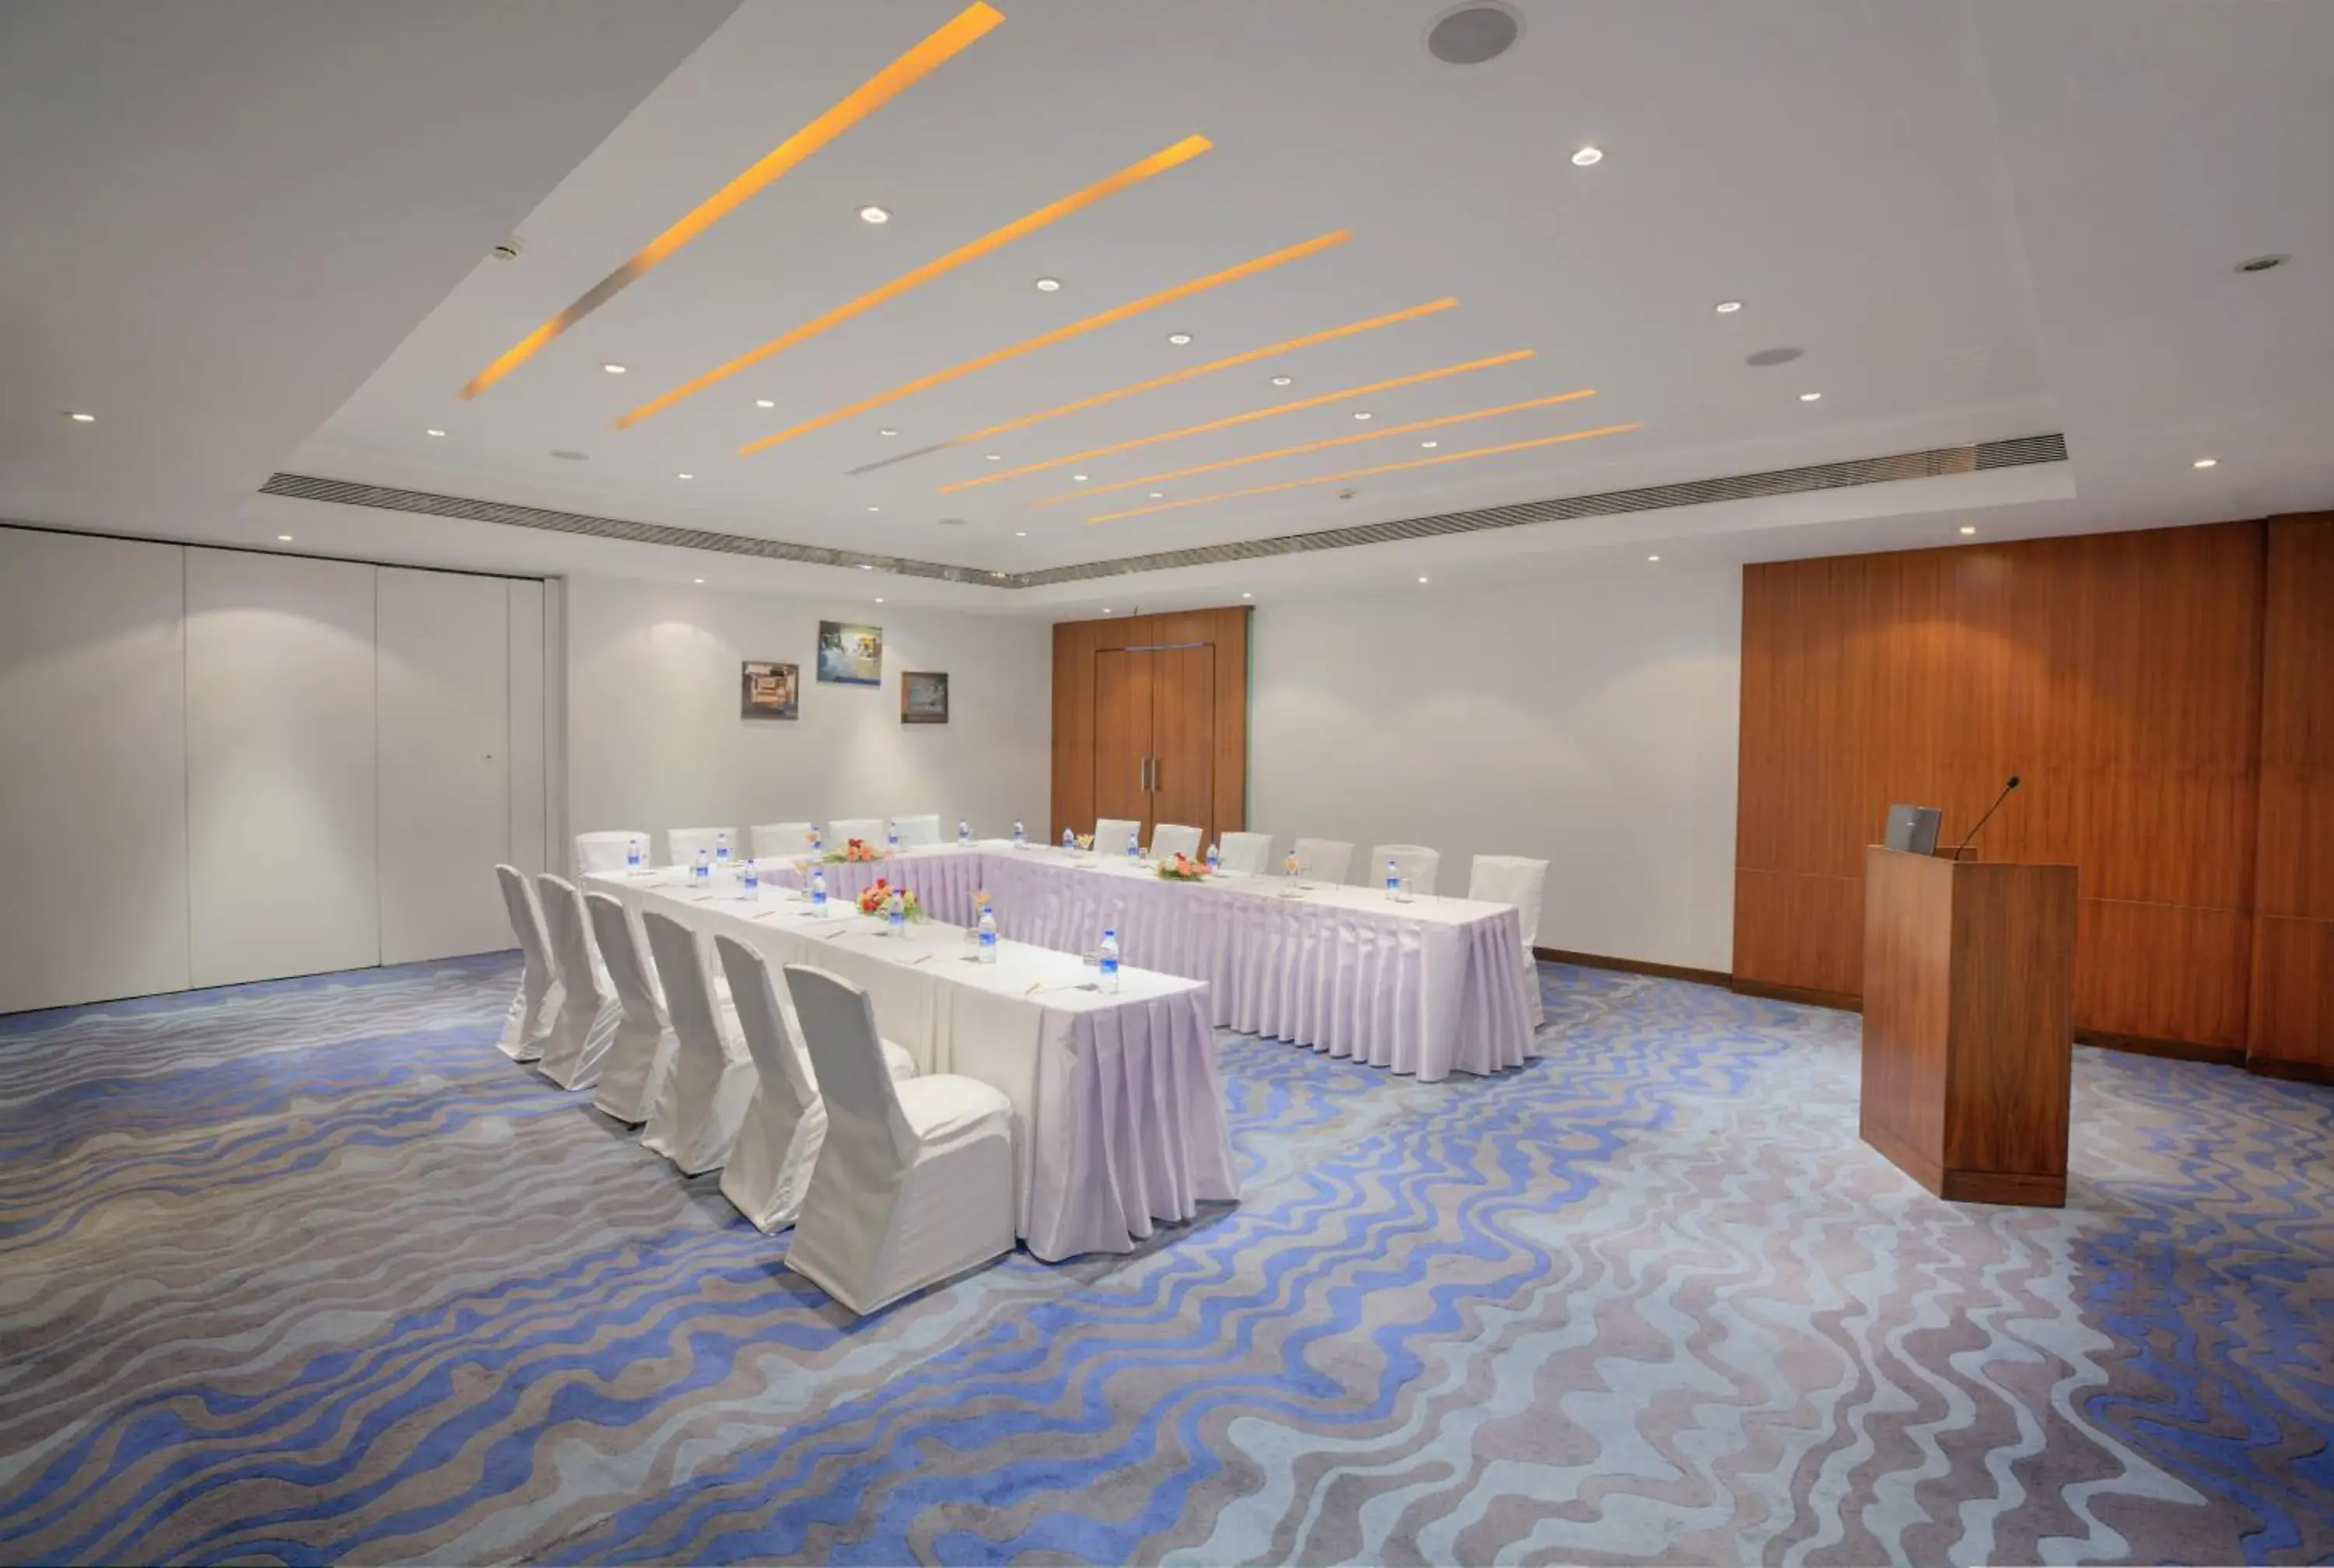 Meeting/conference room in Hotel Parc Estique